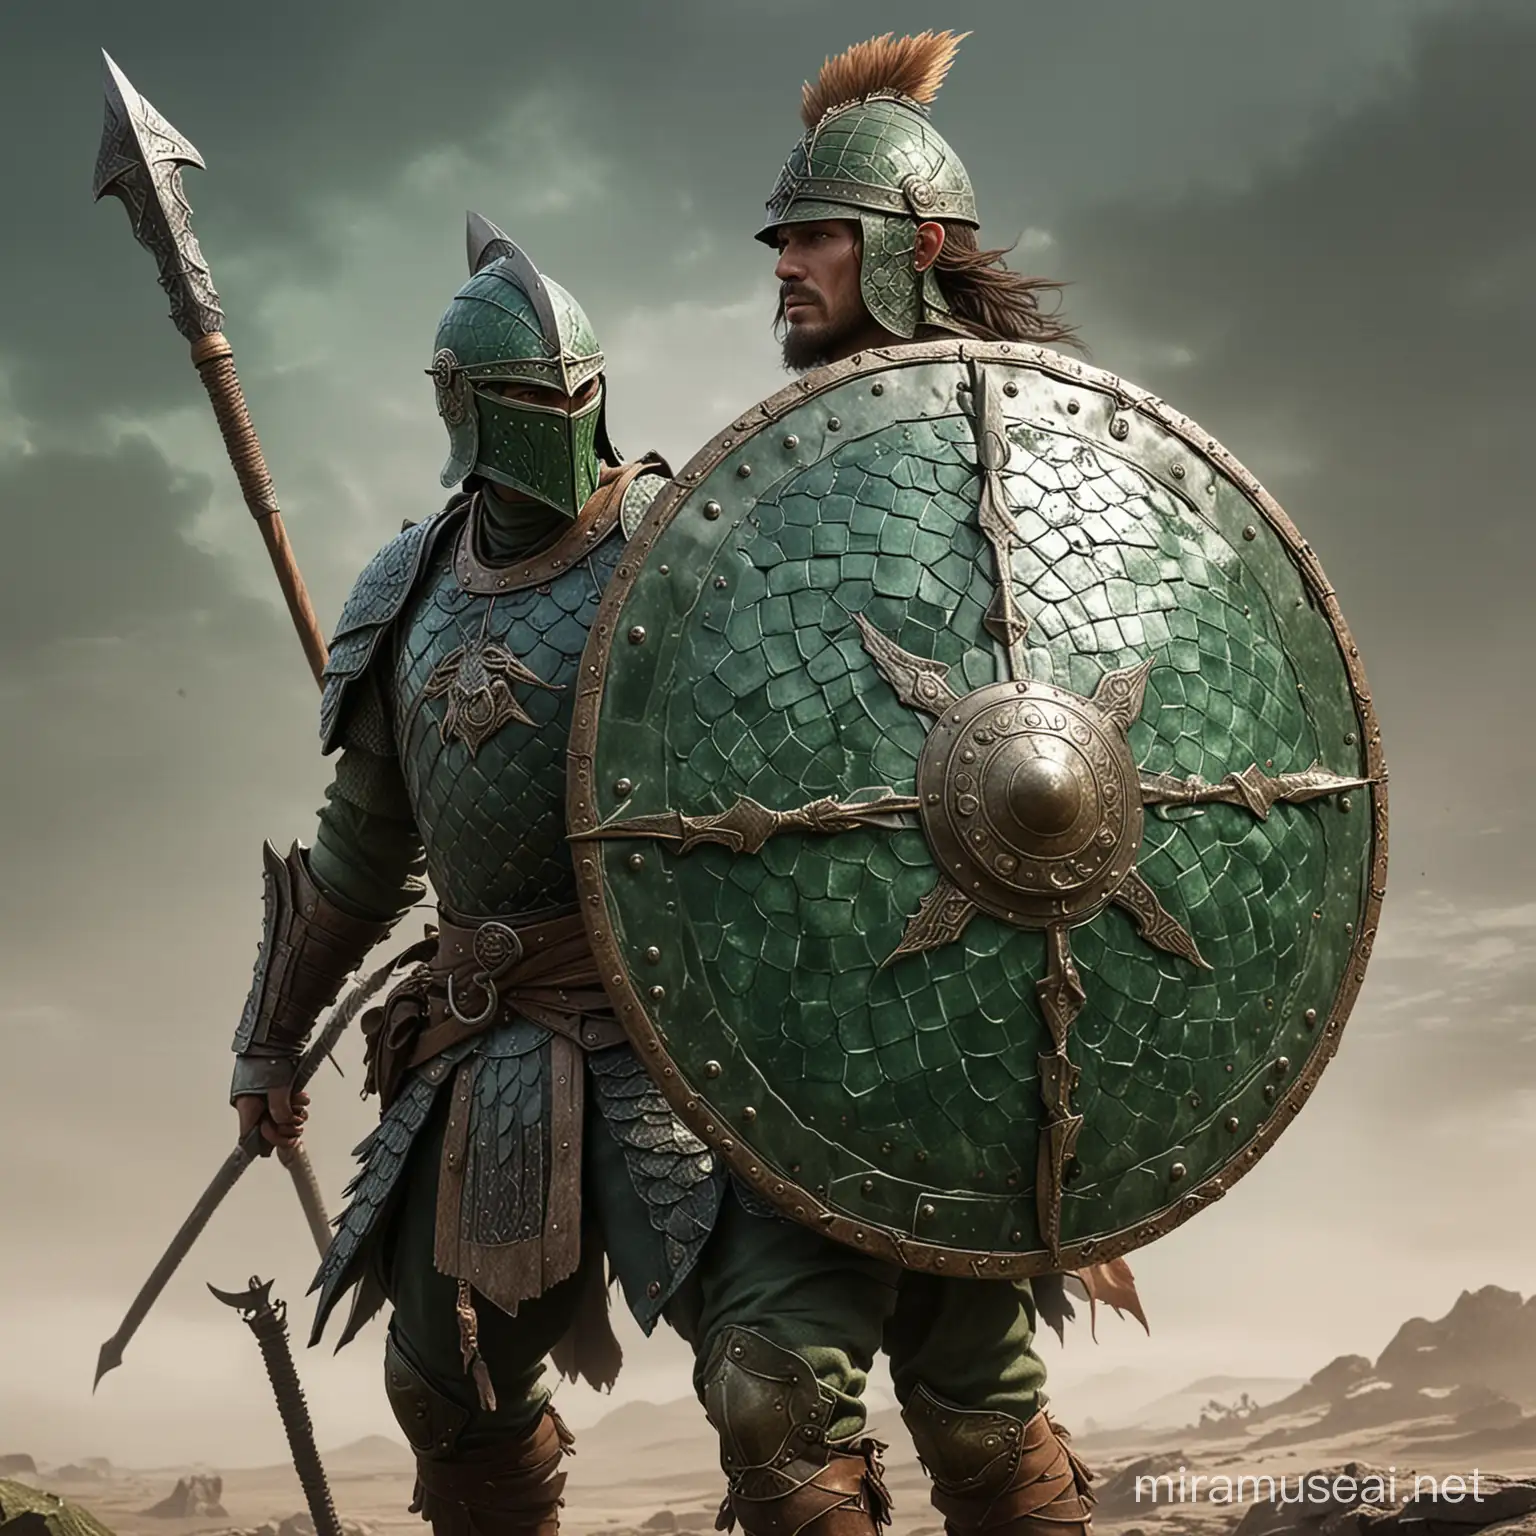 army of spearman. a combination between eastern and western. Wielding a eastern round shield and also a spear. Green coloured armor with dragon scale
